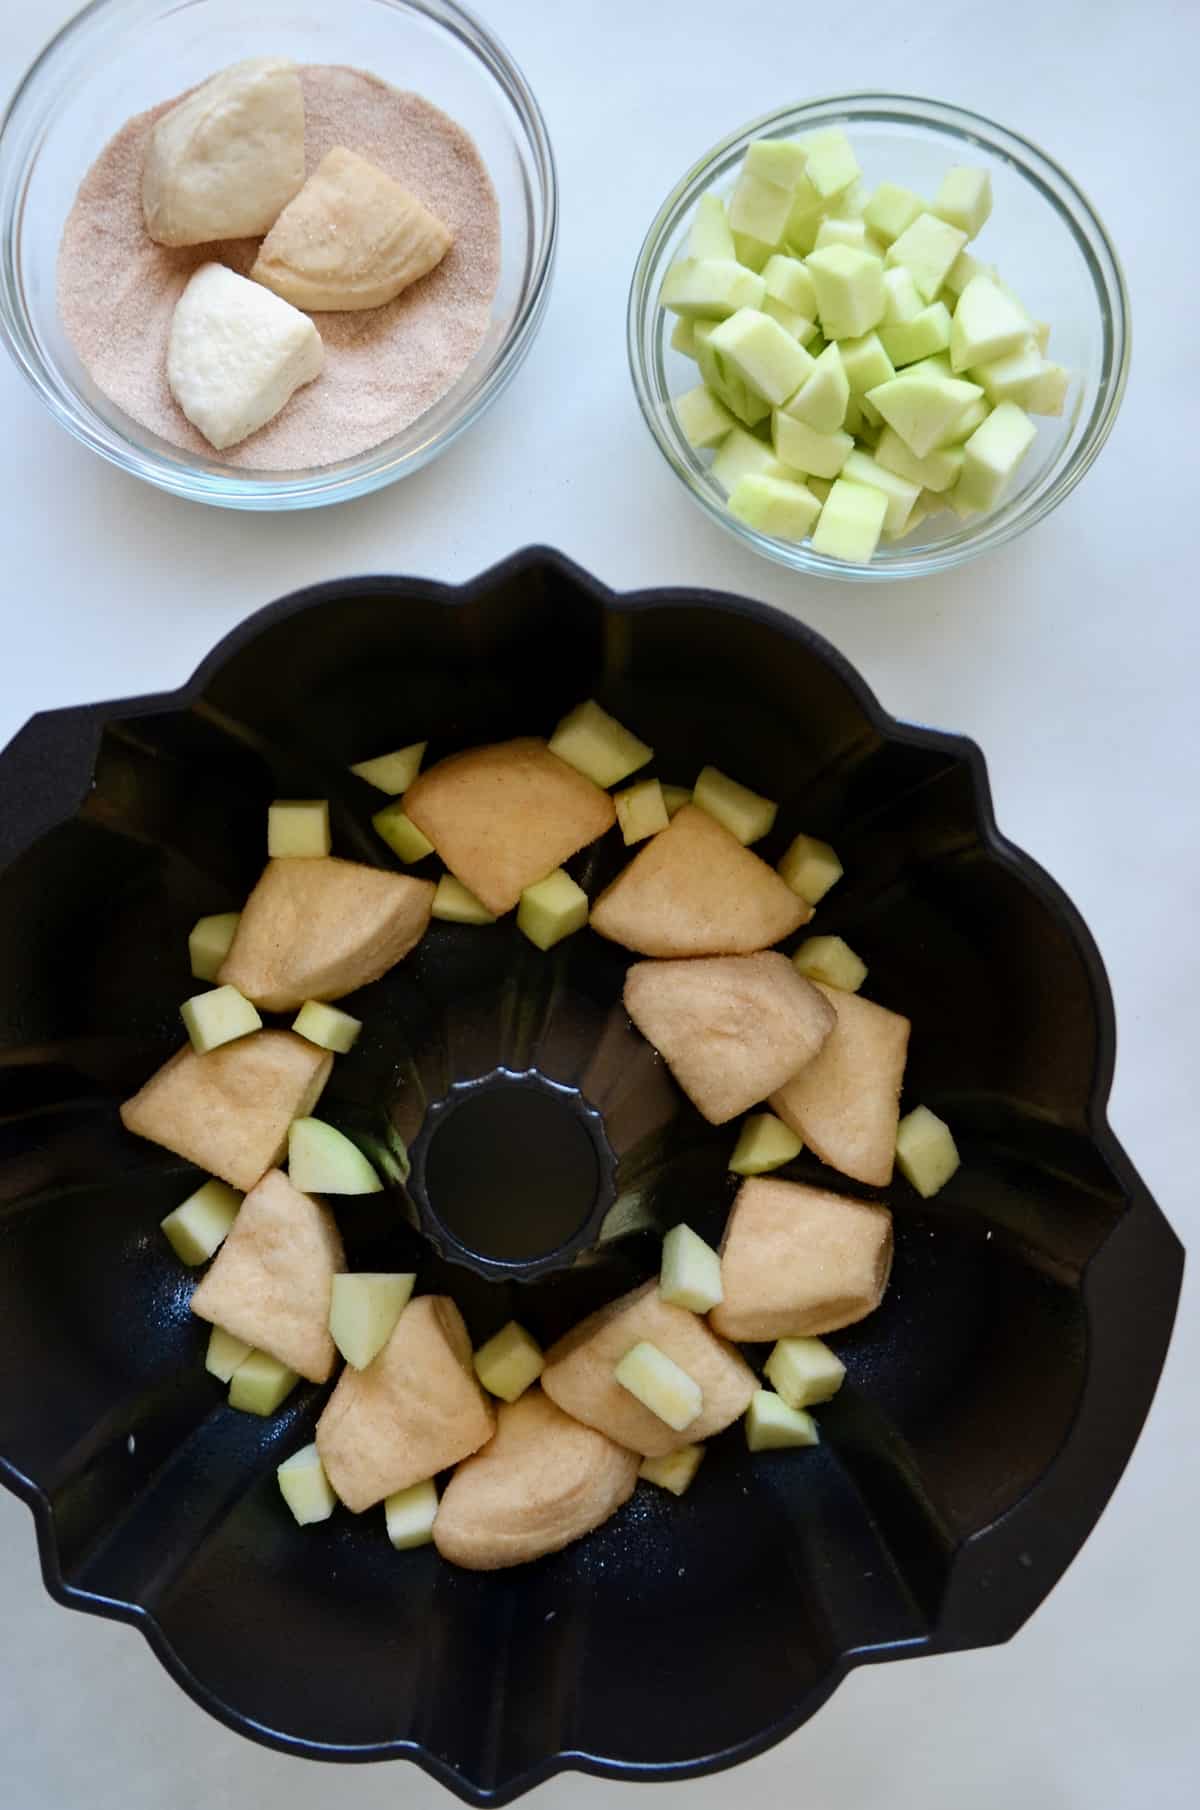 A bundt pan containing diced Granny Smith apples and pieces of canned biscuit dough.